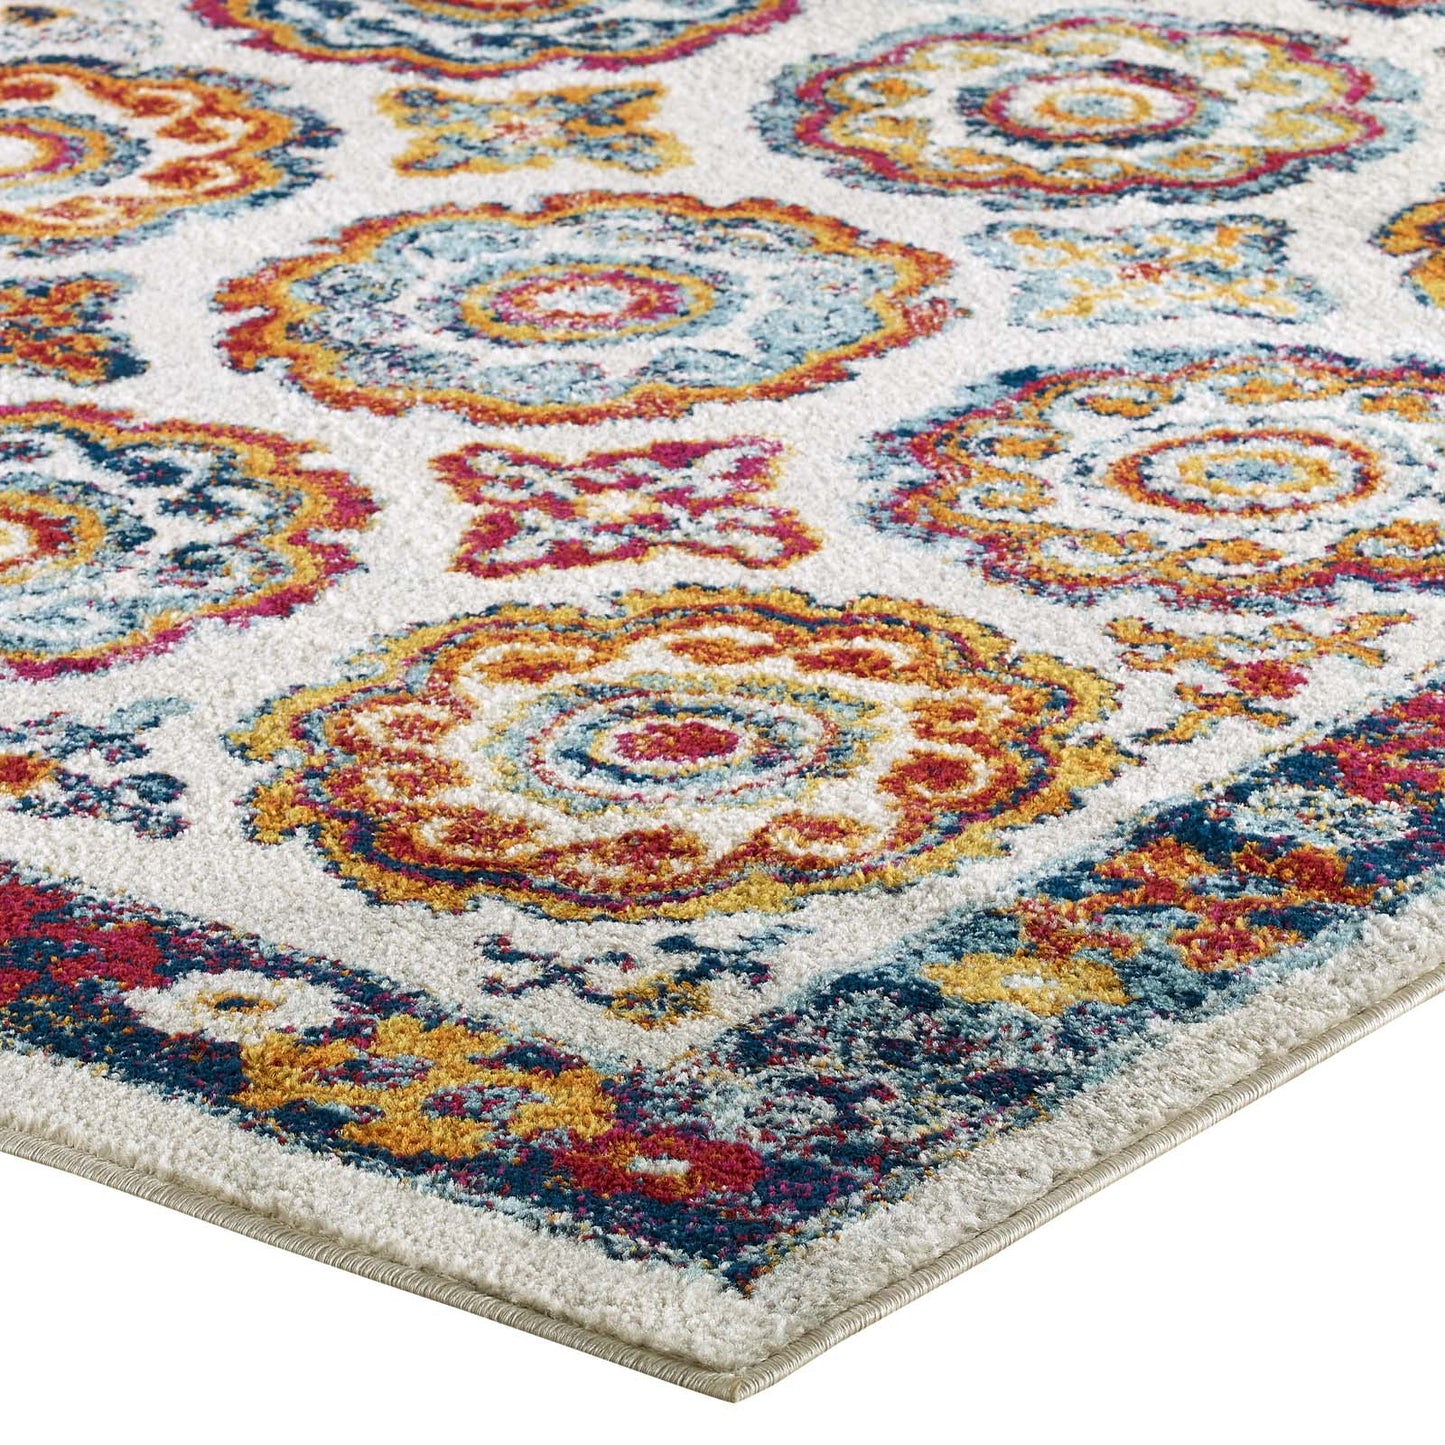 Entourage Odile Distressed Floral Moroccan Trellis 8x10 Area Rug Ivory, Blue, Red, Orange, Yellow R-1168A-810